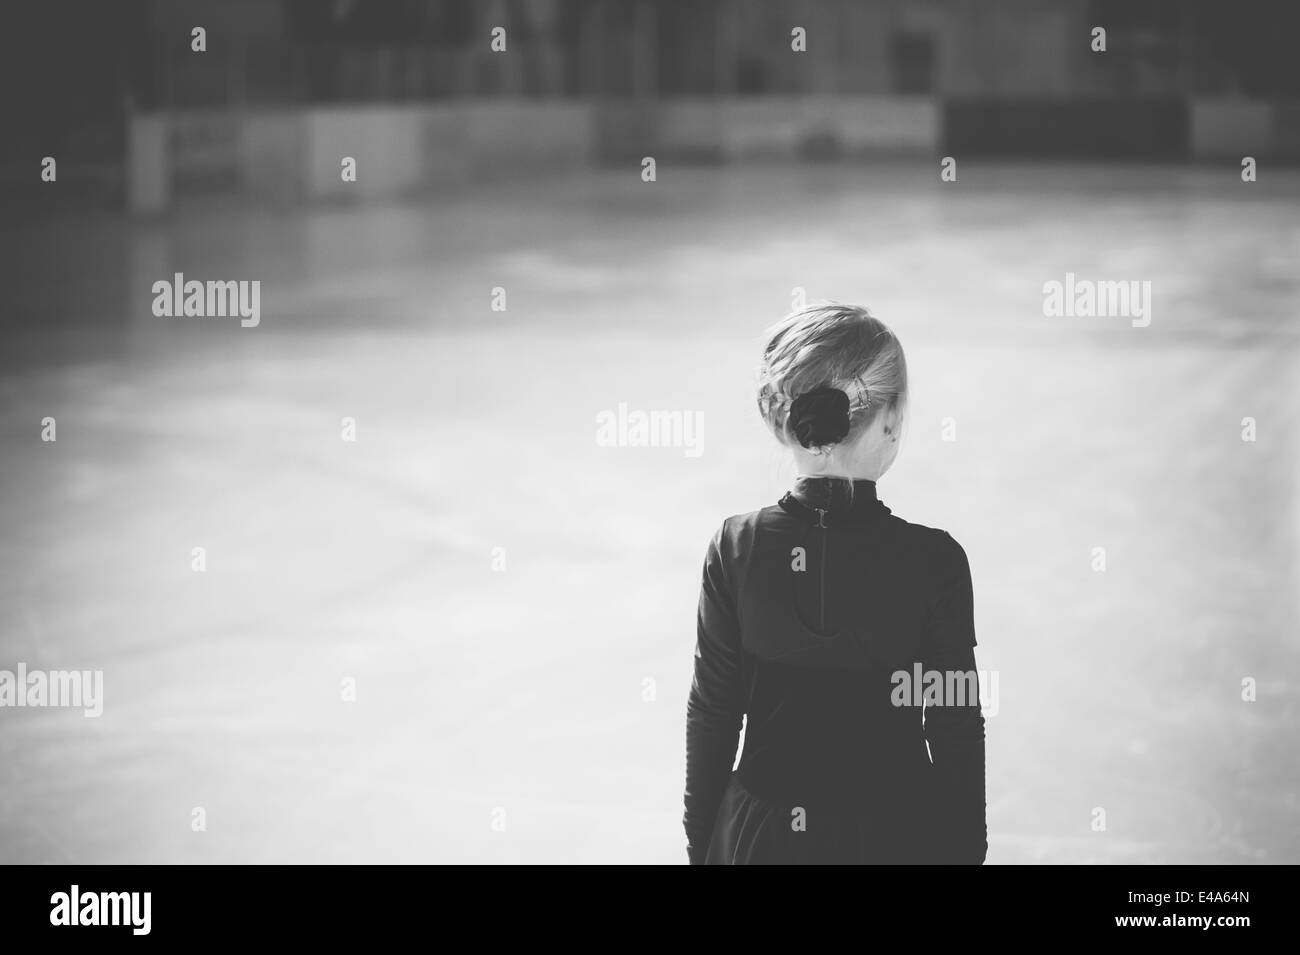 Young female figure skater standing on ice rink at competition, back view Stock Photo